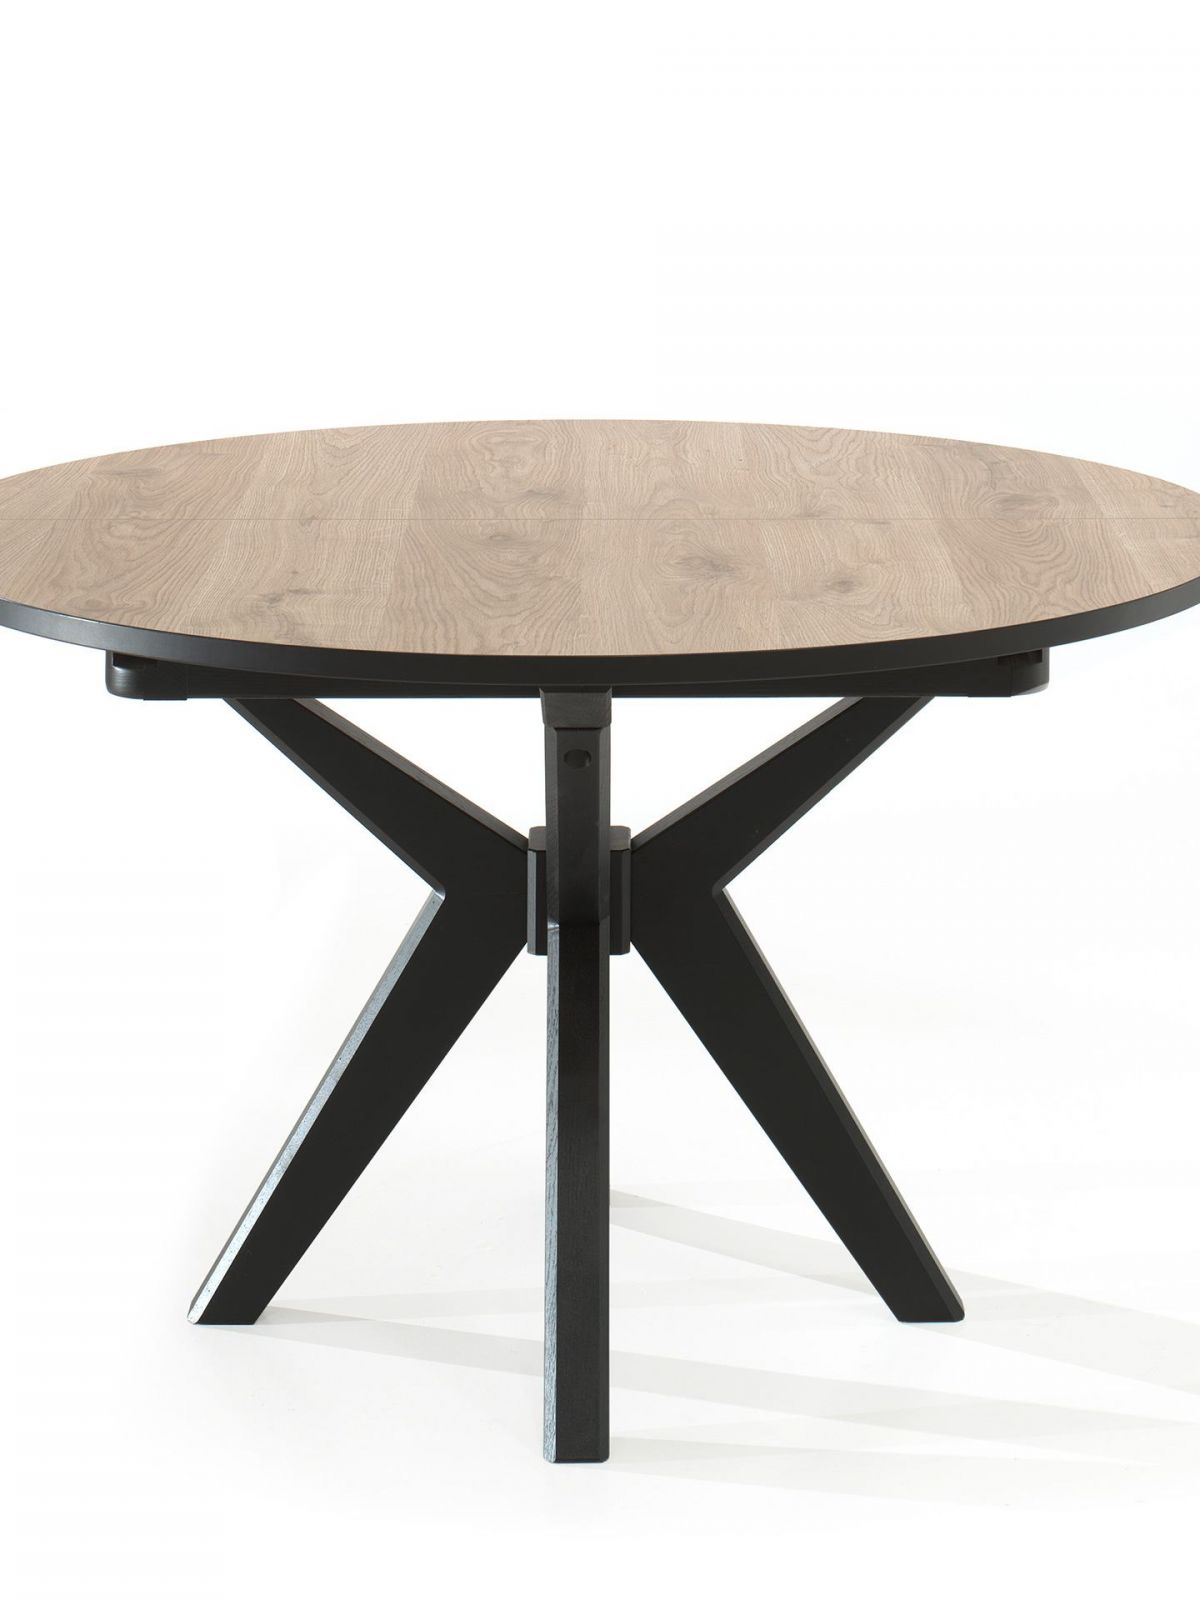 Table ronde fixe pied massif central